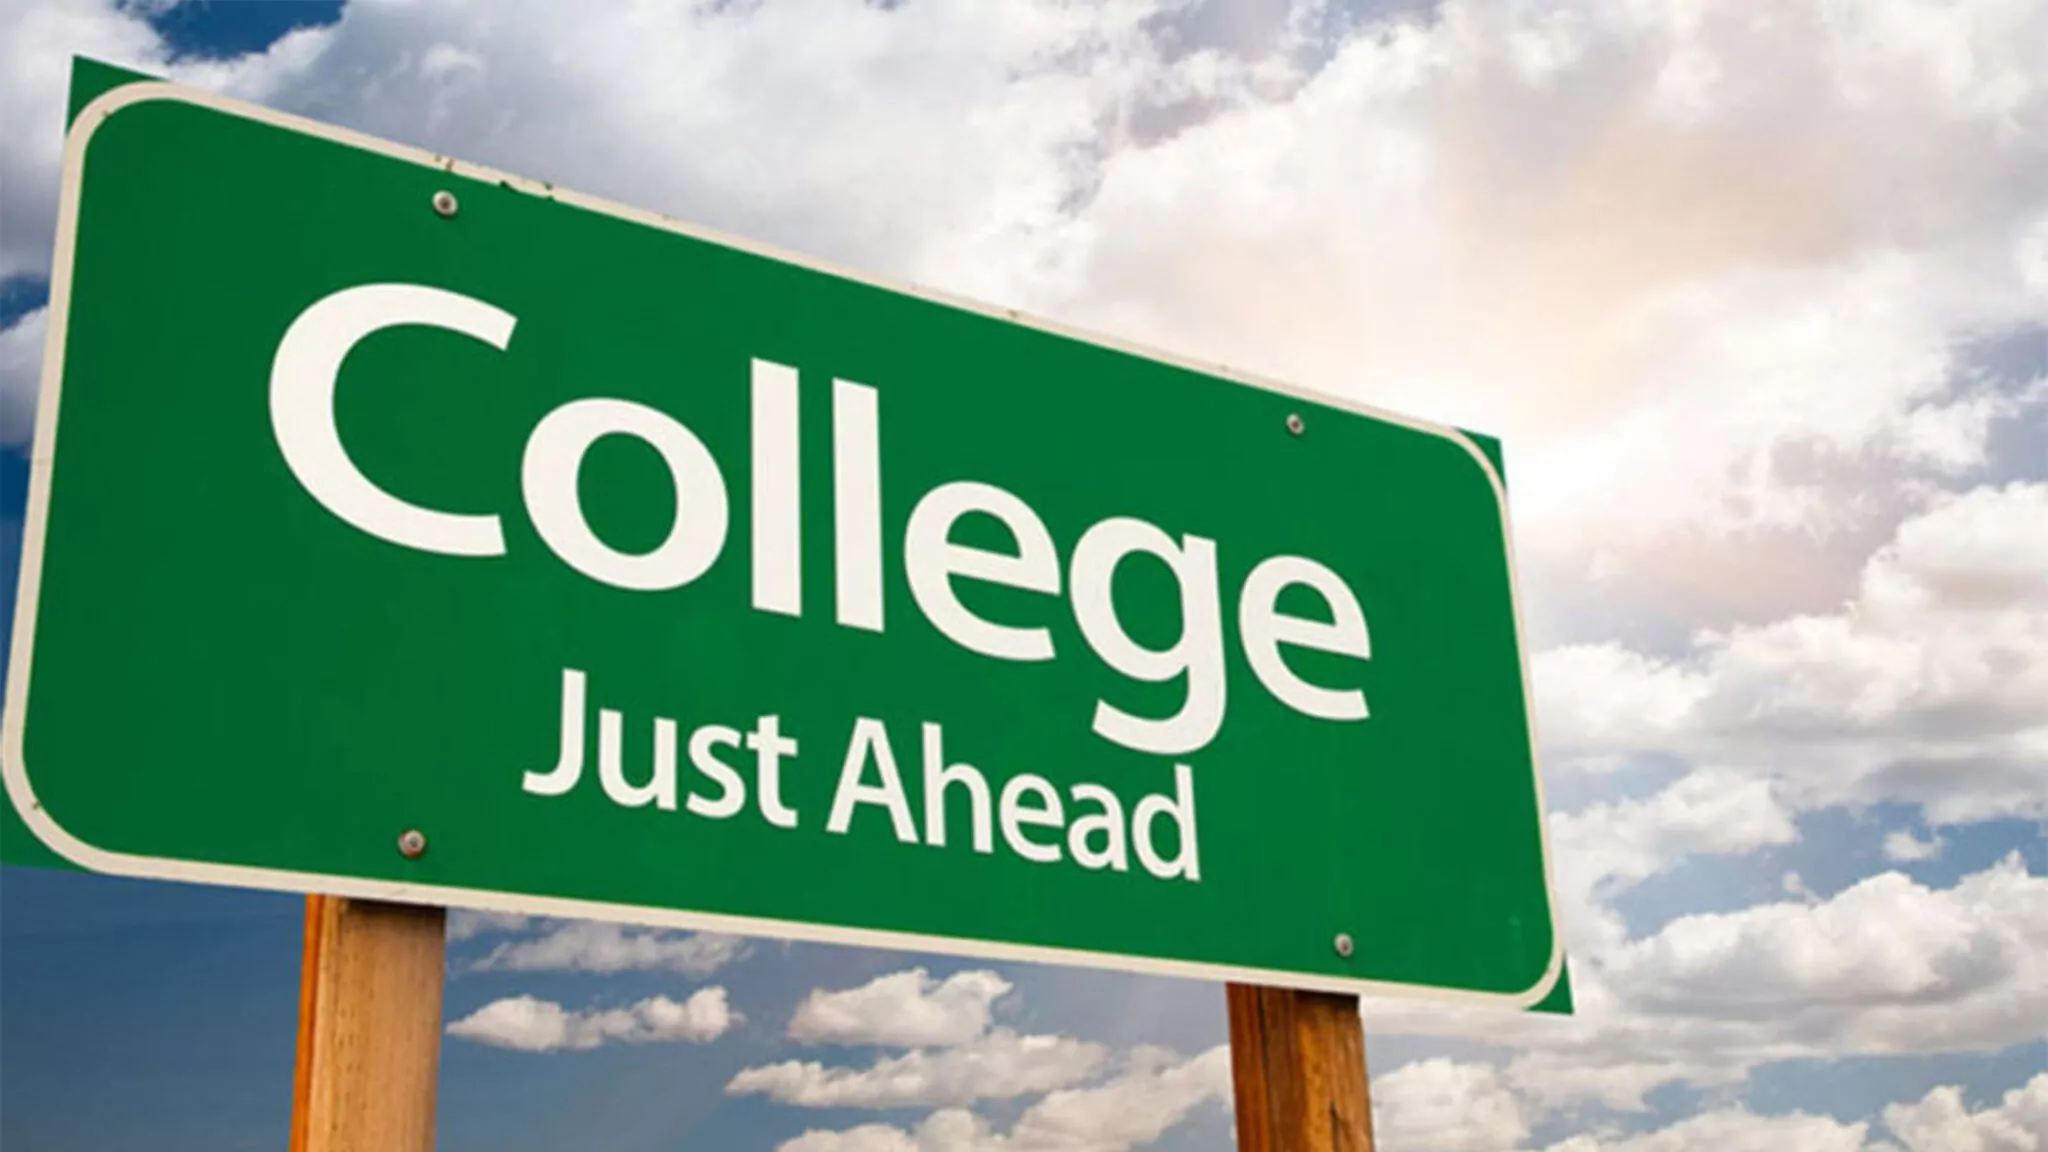 College just ahead